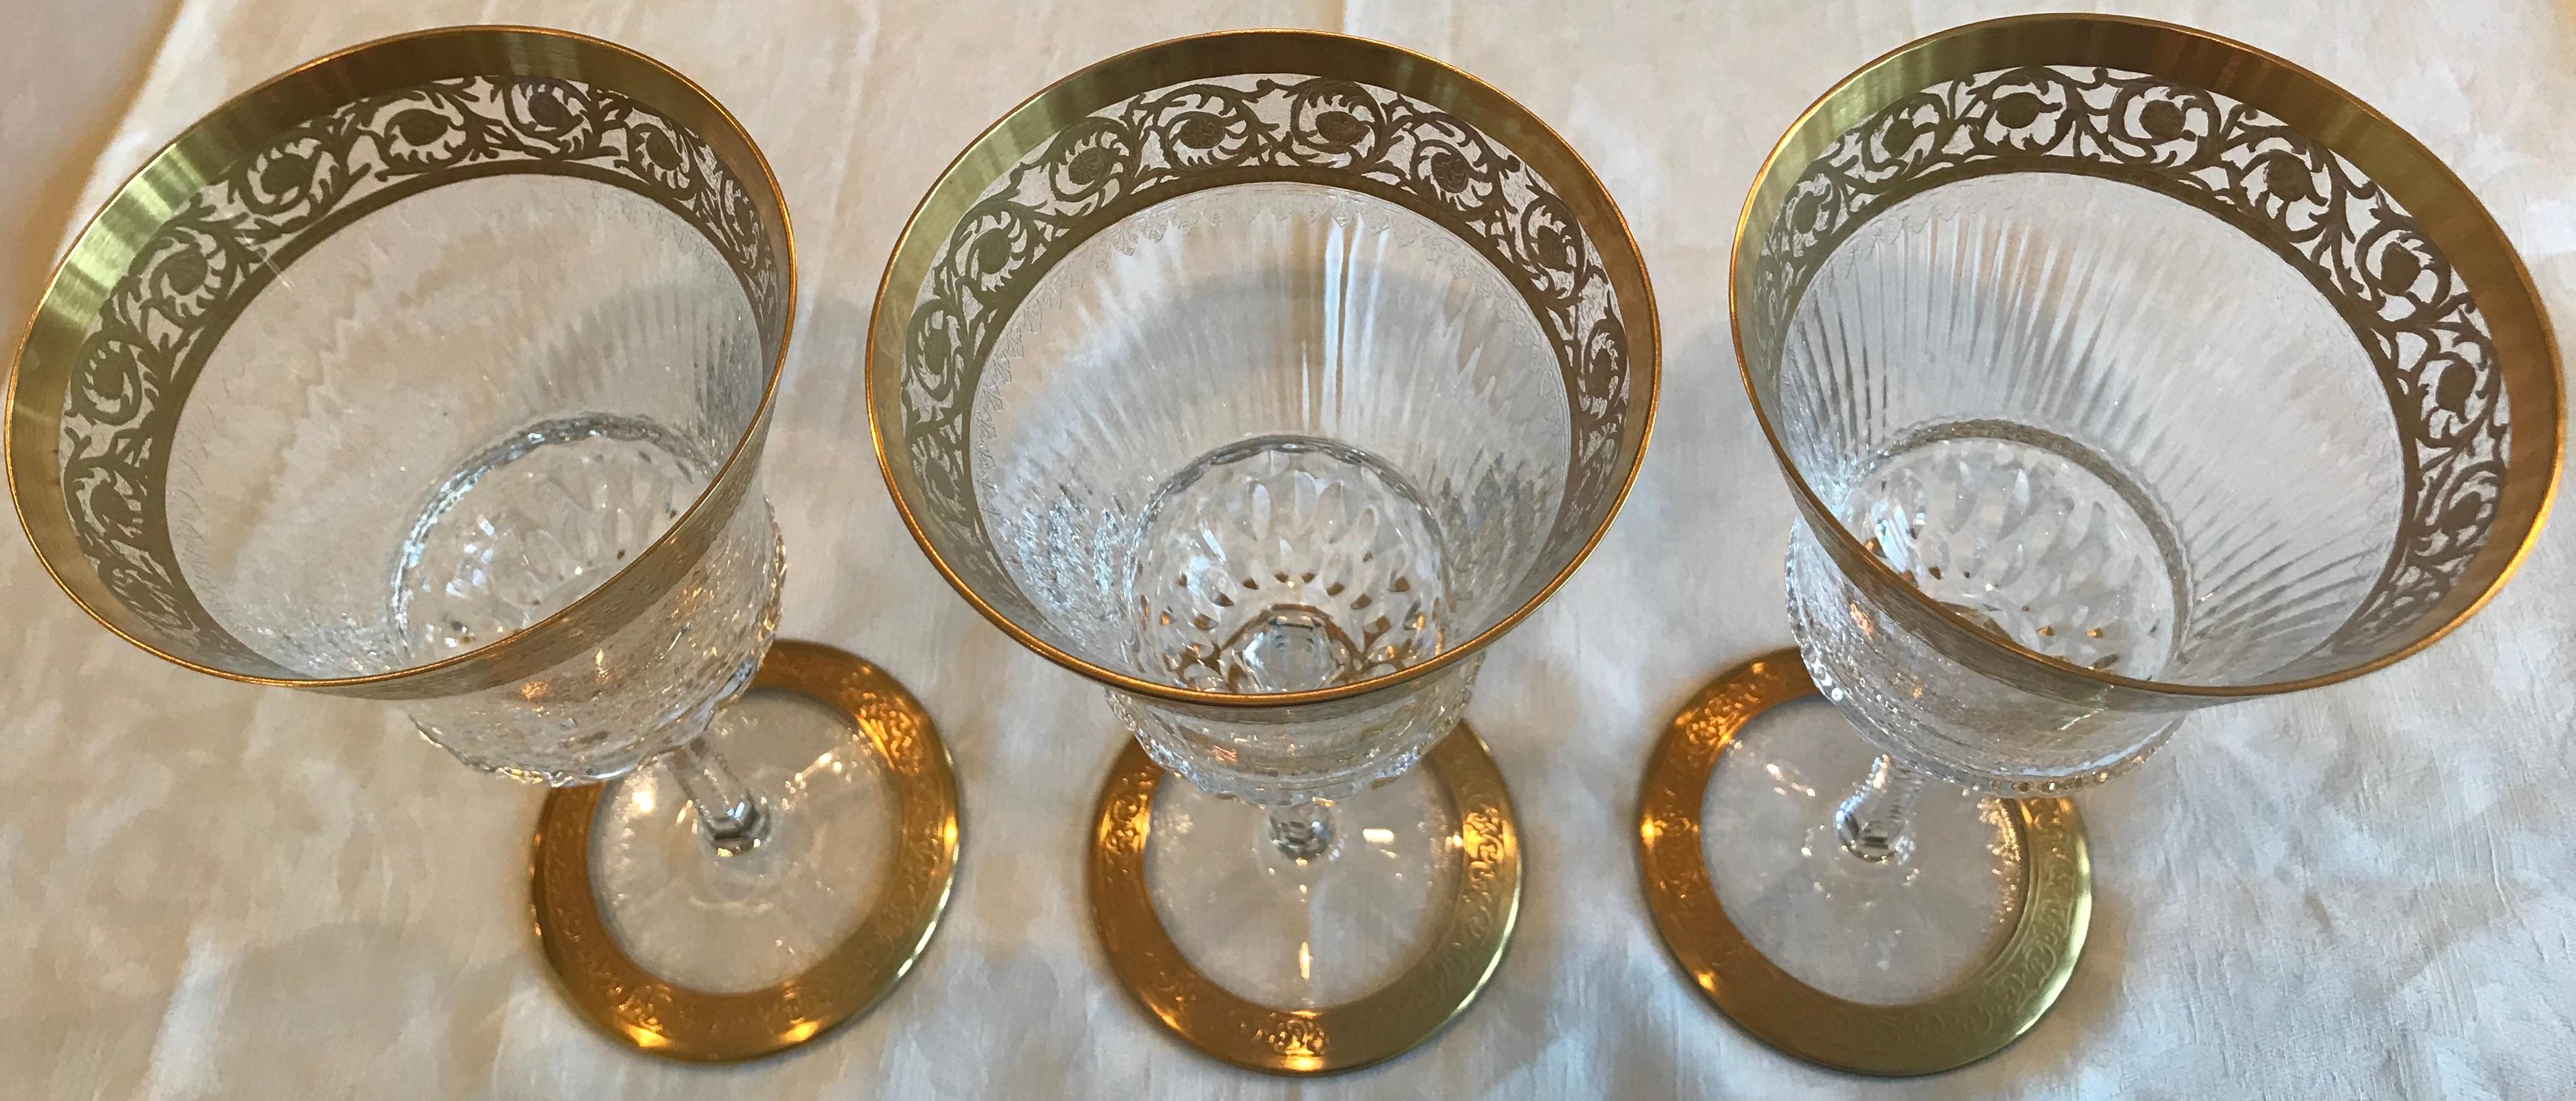 The Saint Louis gold thistle pattern is still in production, making this “like new” set of 3 American water goblets produced between 1986 and 1992 a nice addition to your collection (or the starting point for one that can grow!).

These beautiful,